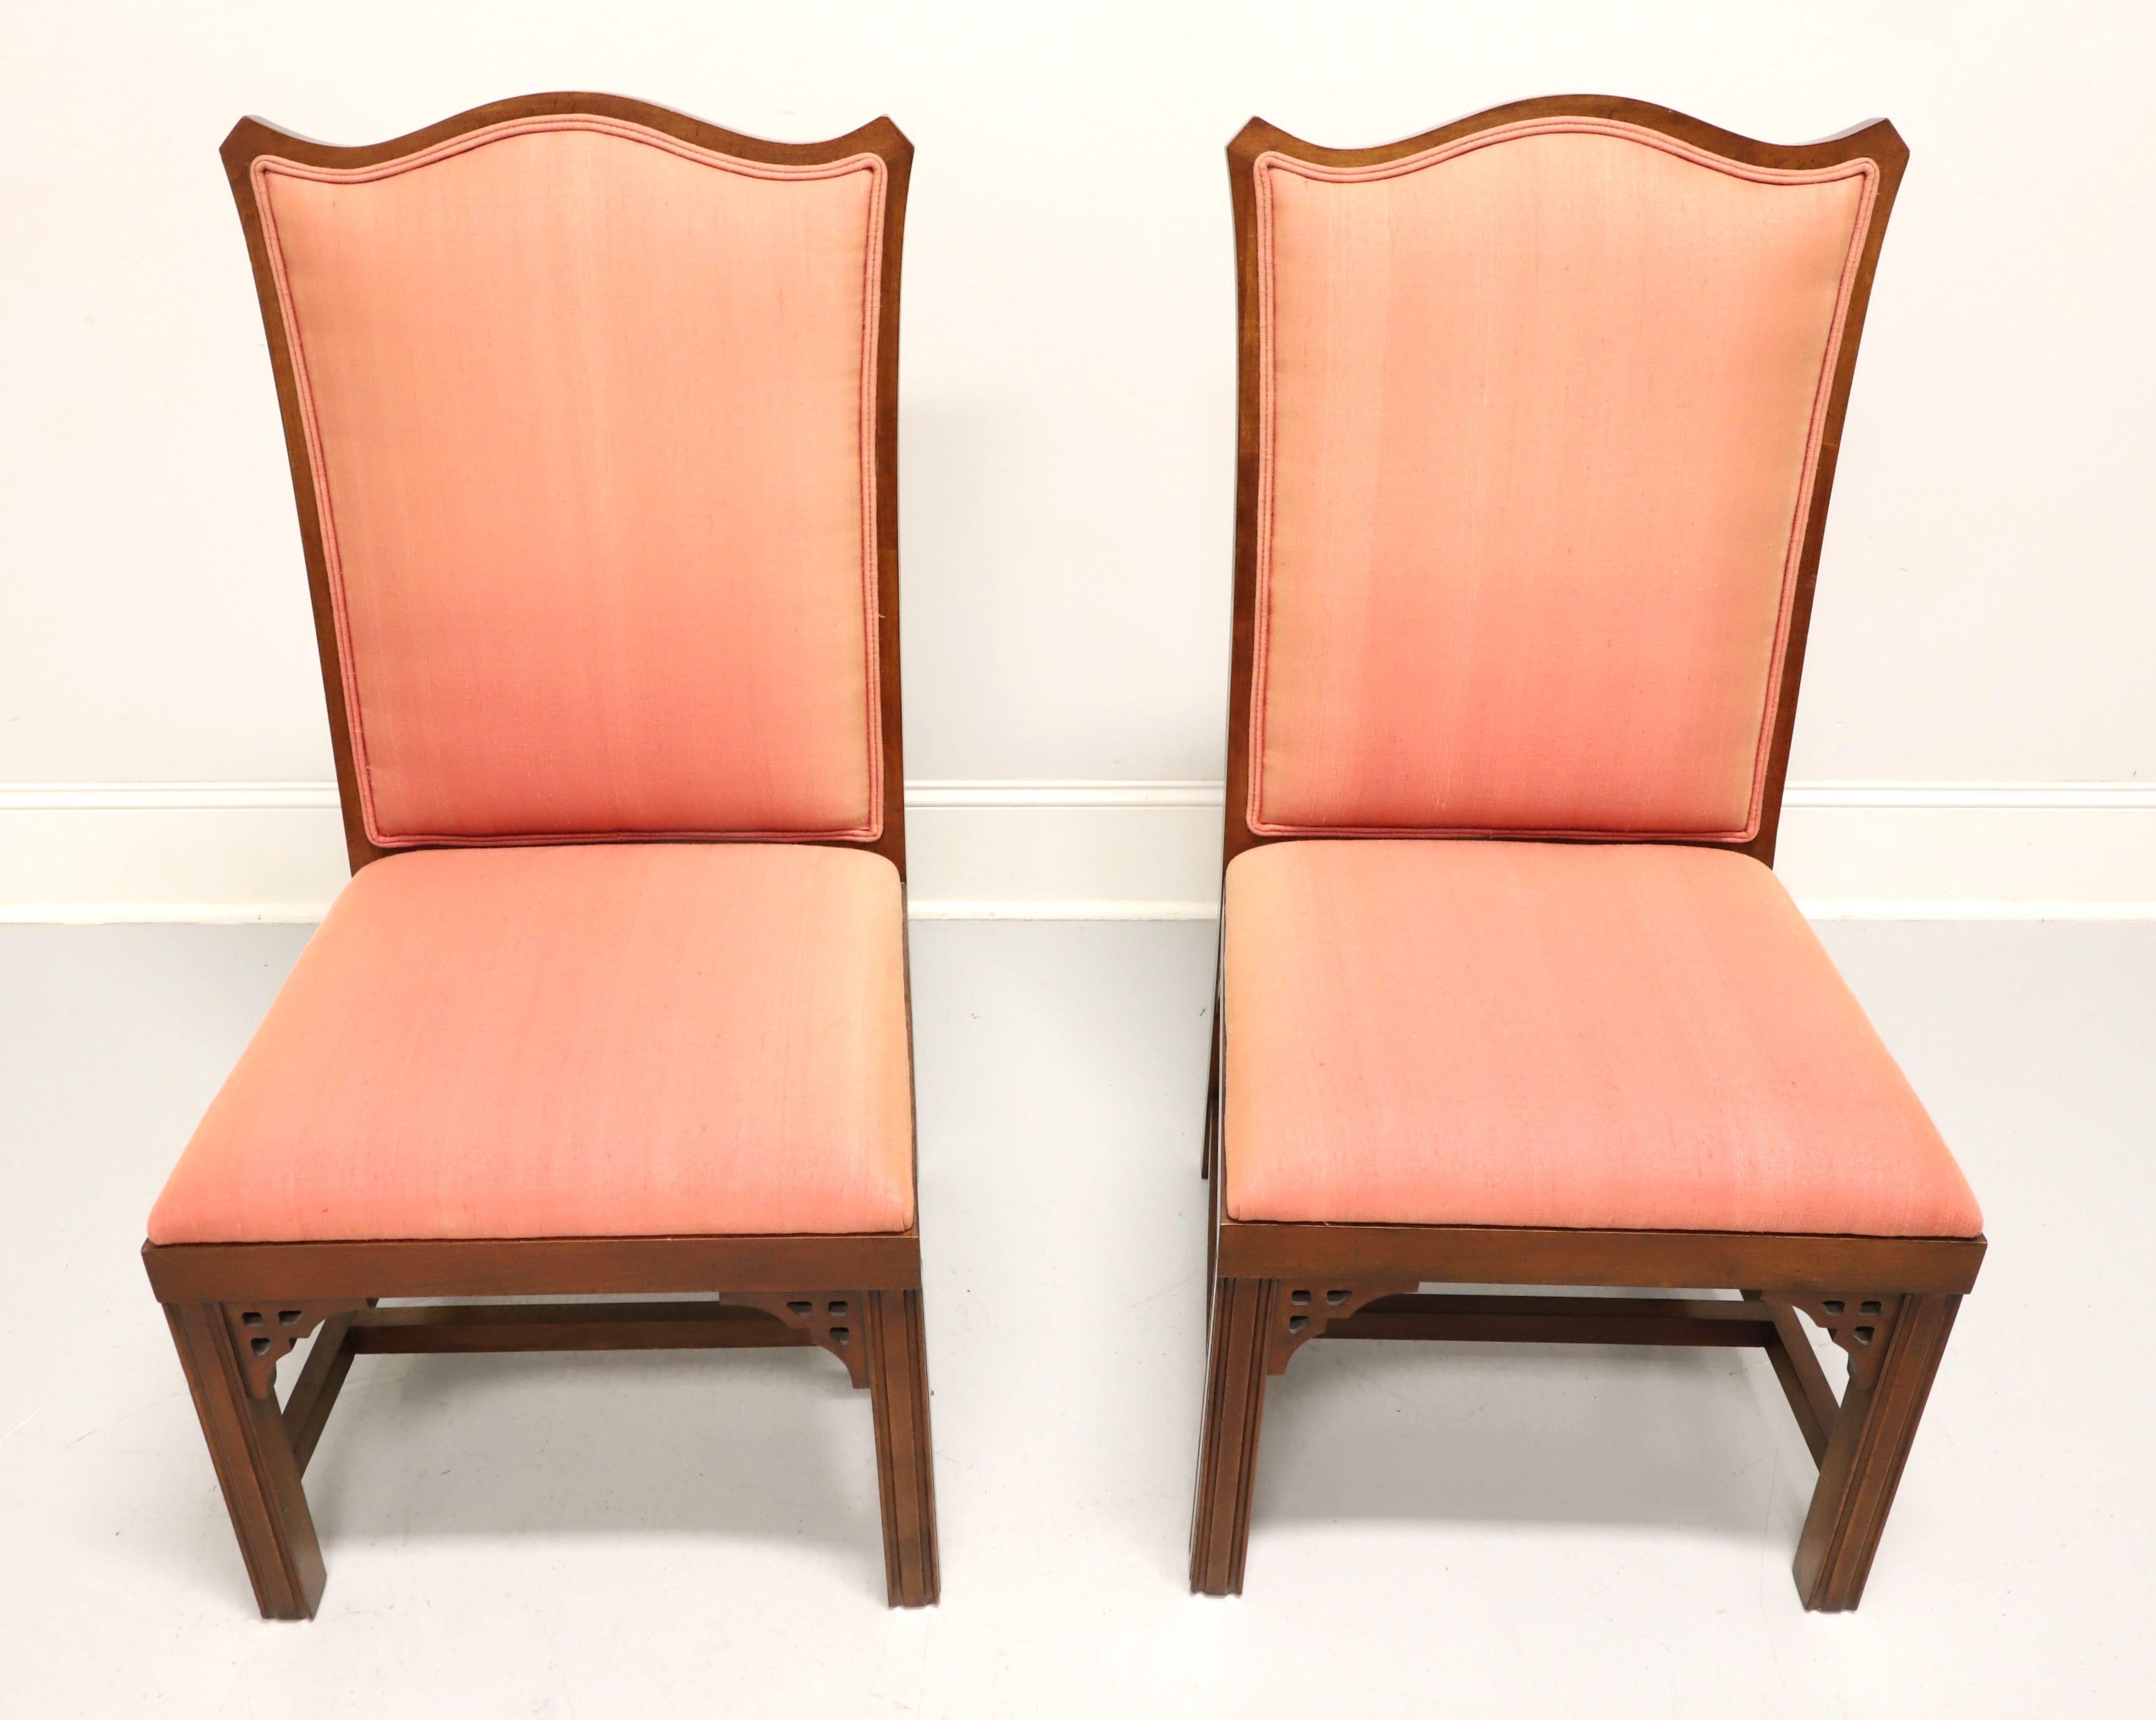 A pair of Asian inspired dining side chairs, unbranded, likely Thomasville or American of Martinsville. Cherry with decorative fretwork accents under apron at corners, carved design to chair back, salmon color fabric upholstered backrest & seat,